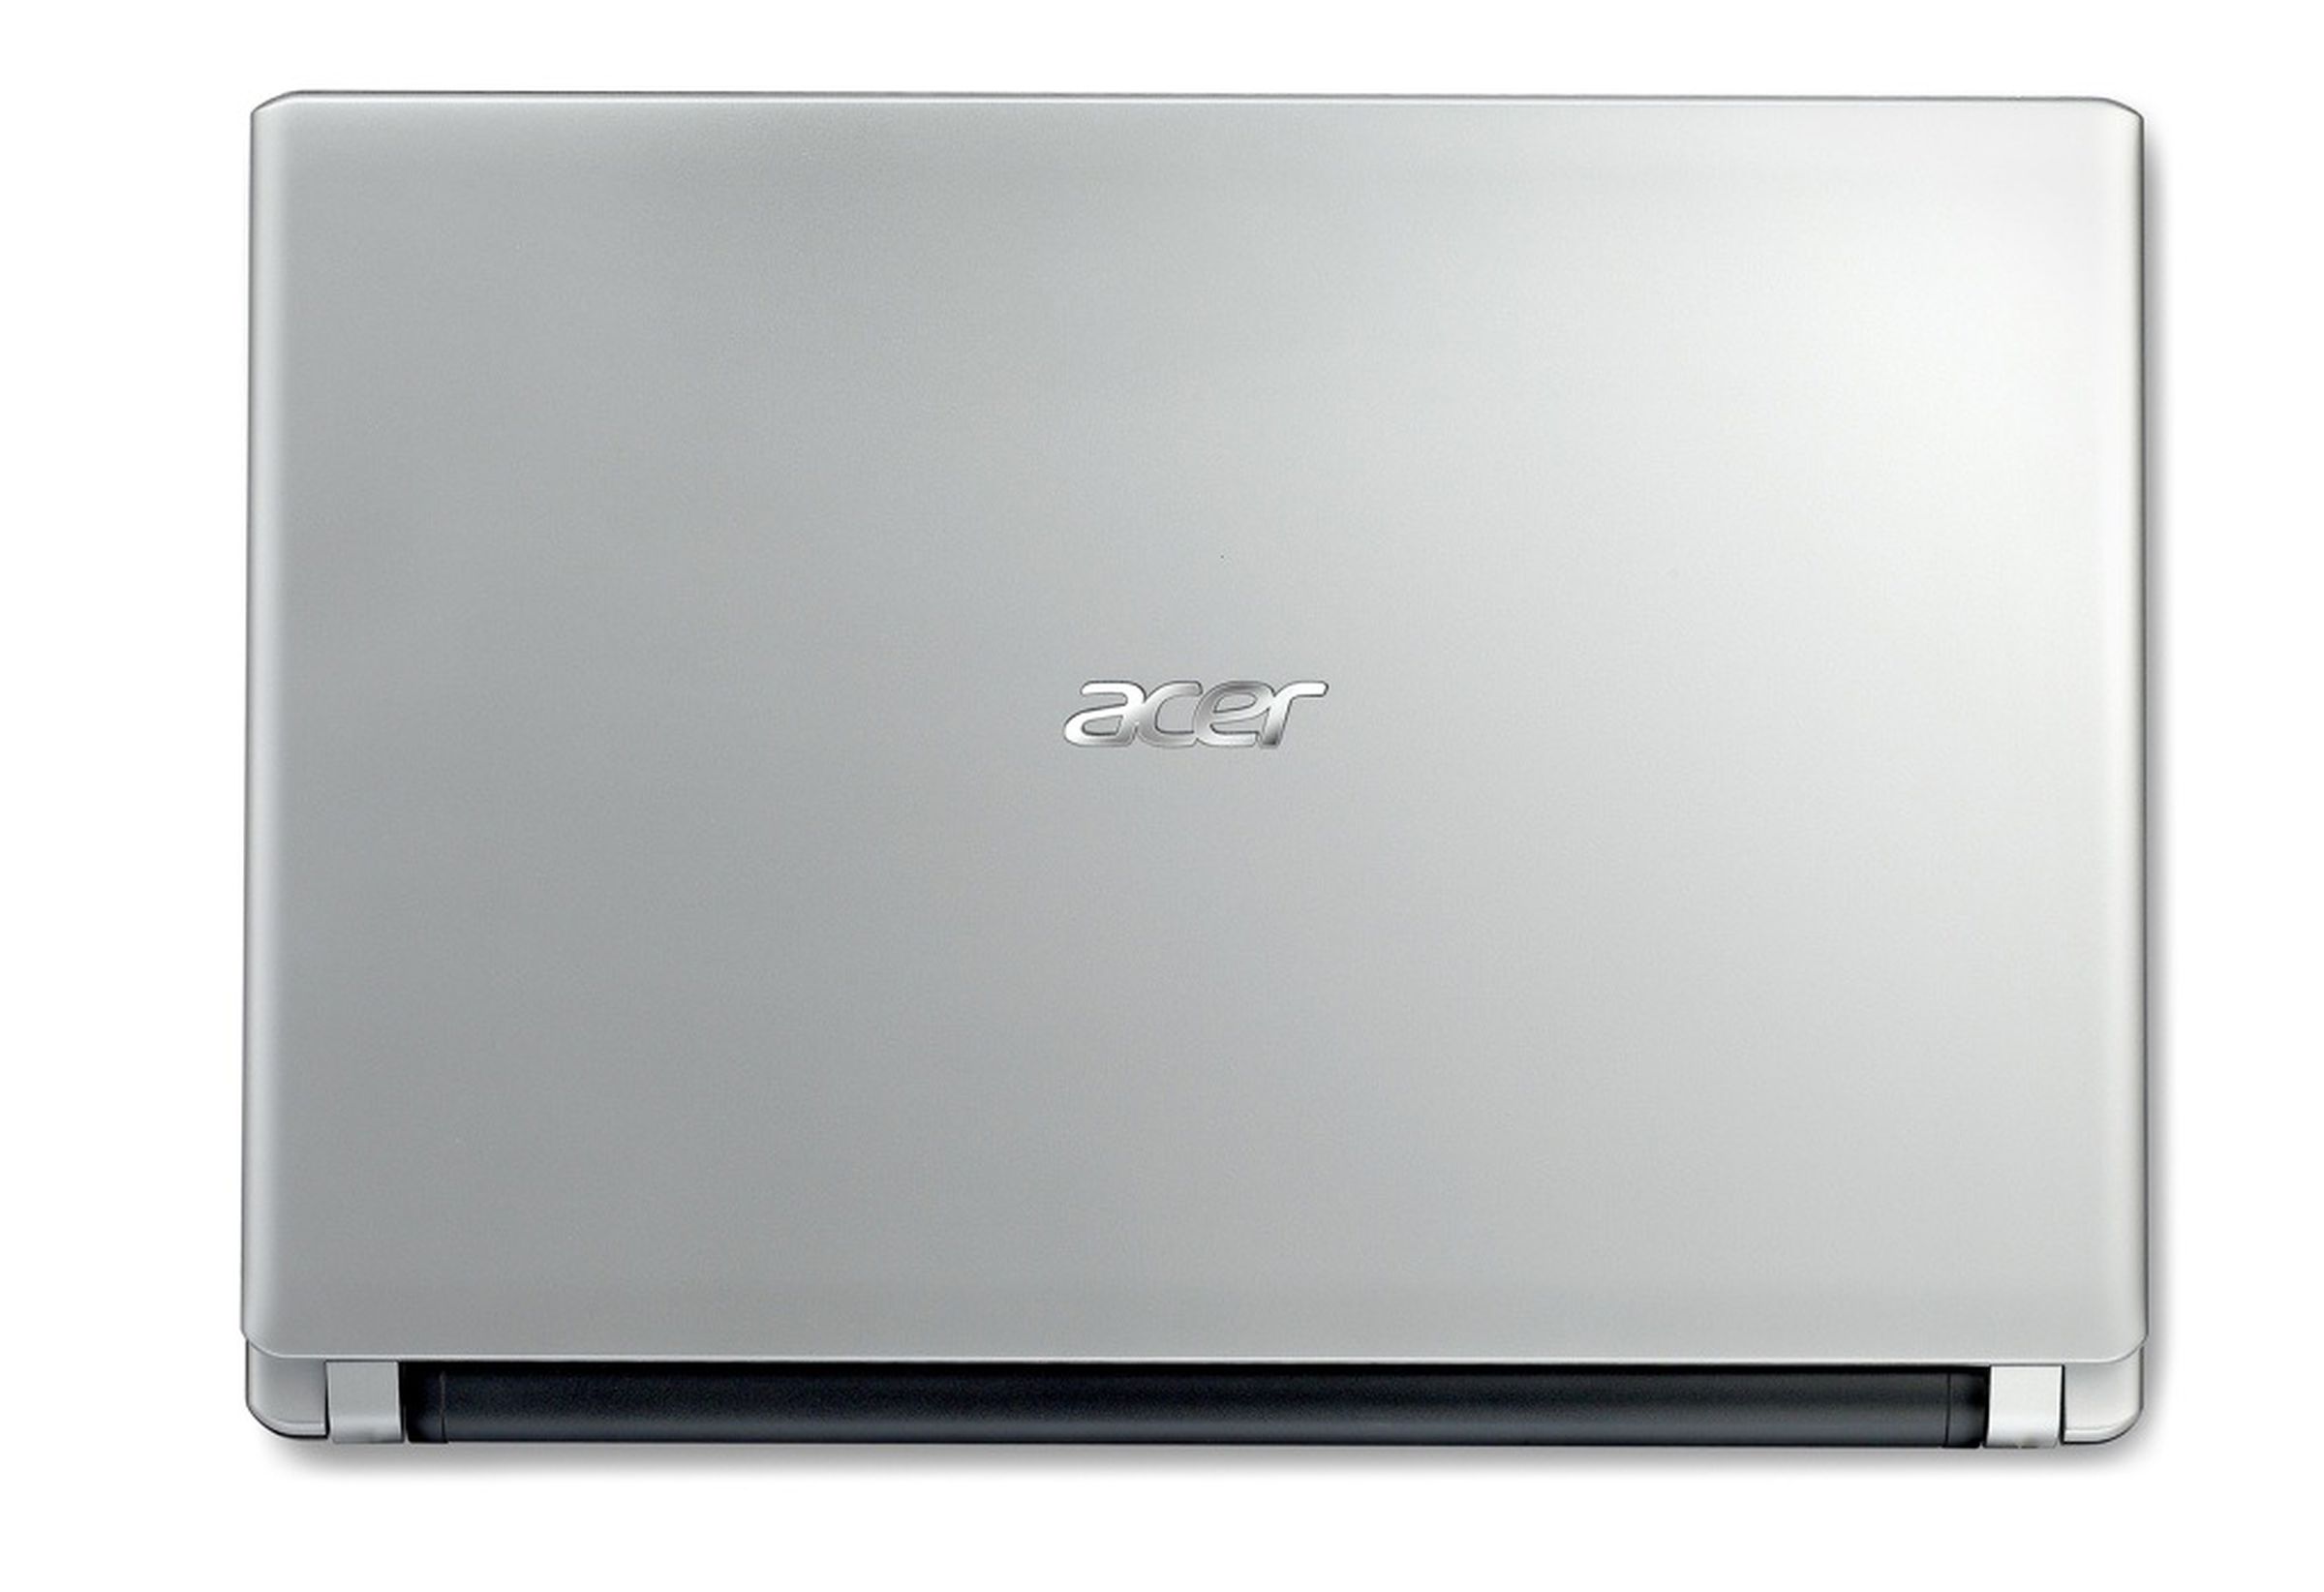 Acer Aspire V5 touch press pictures